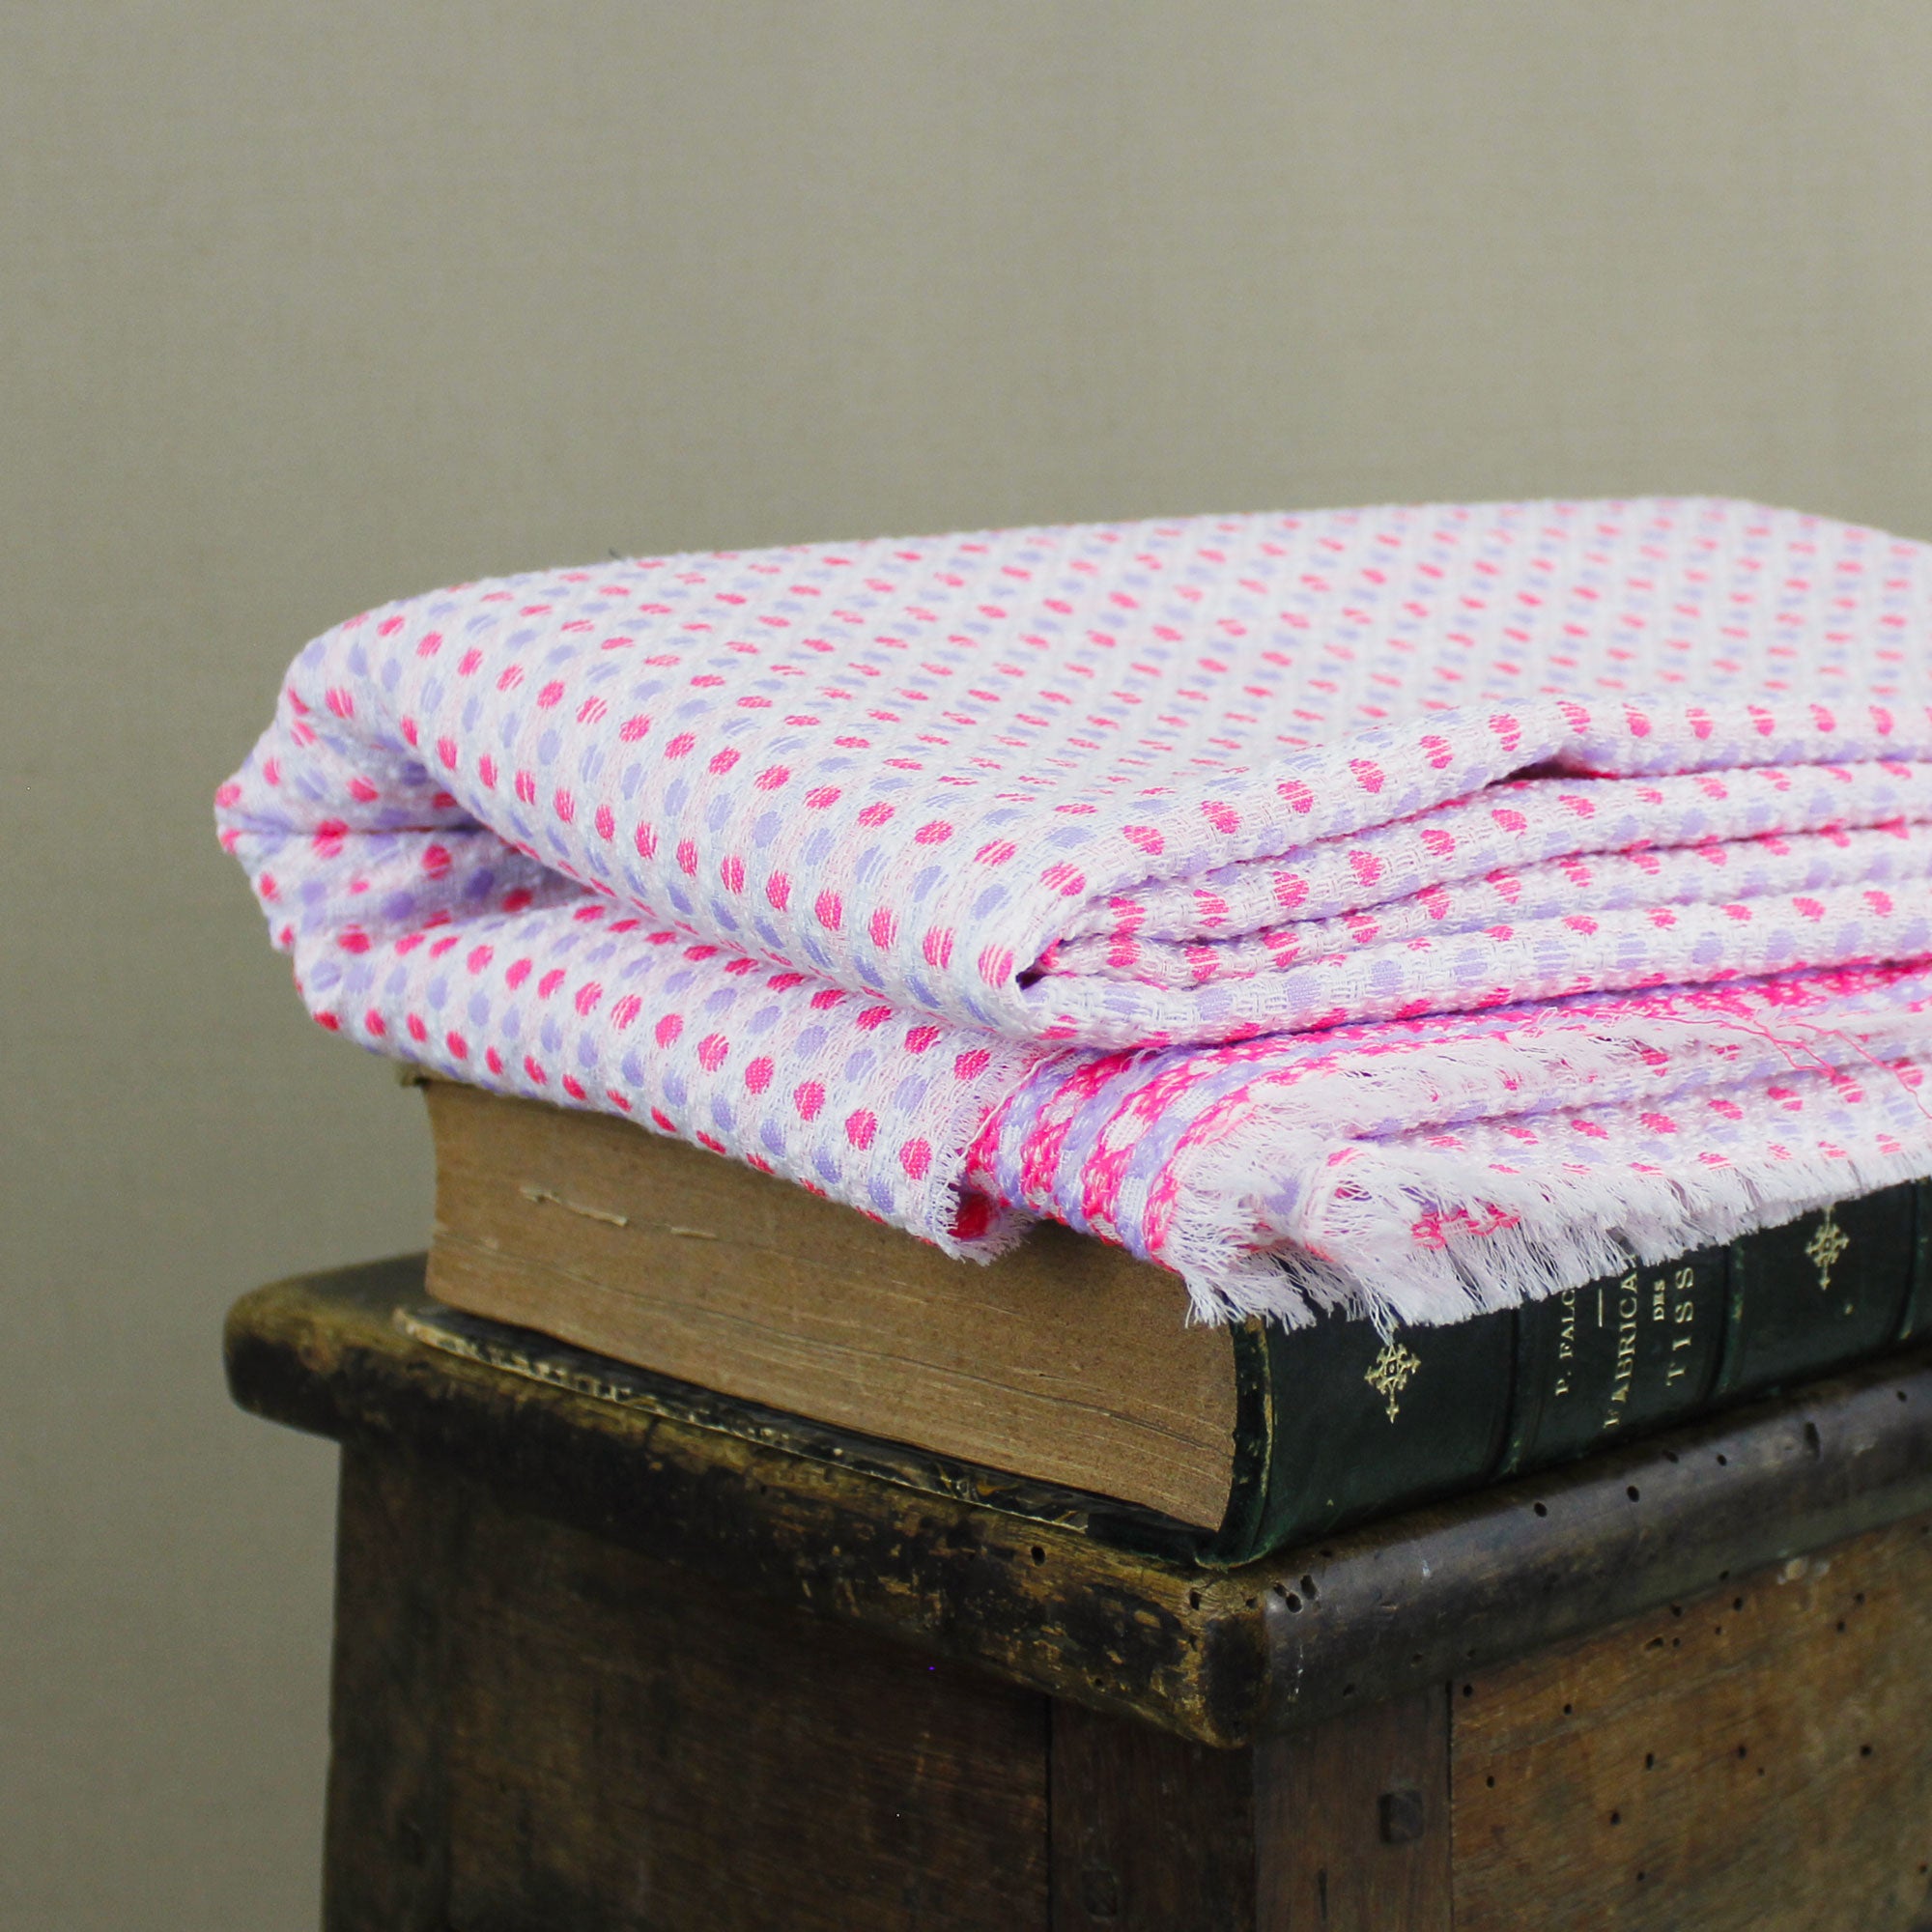 Cotton jacquard fabric with pink and parma polka dots